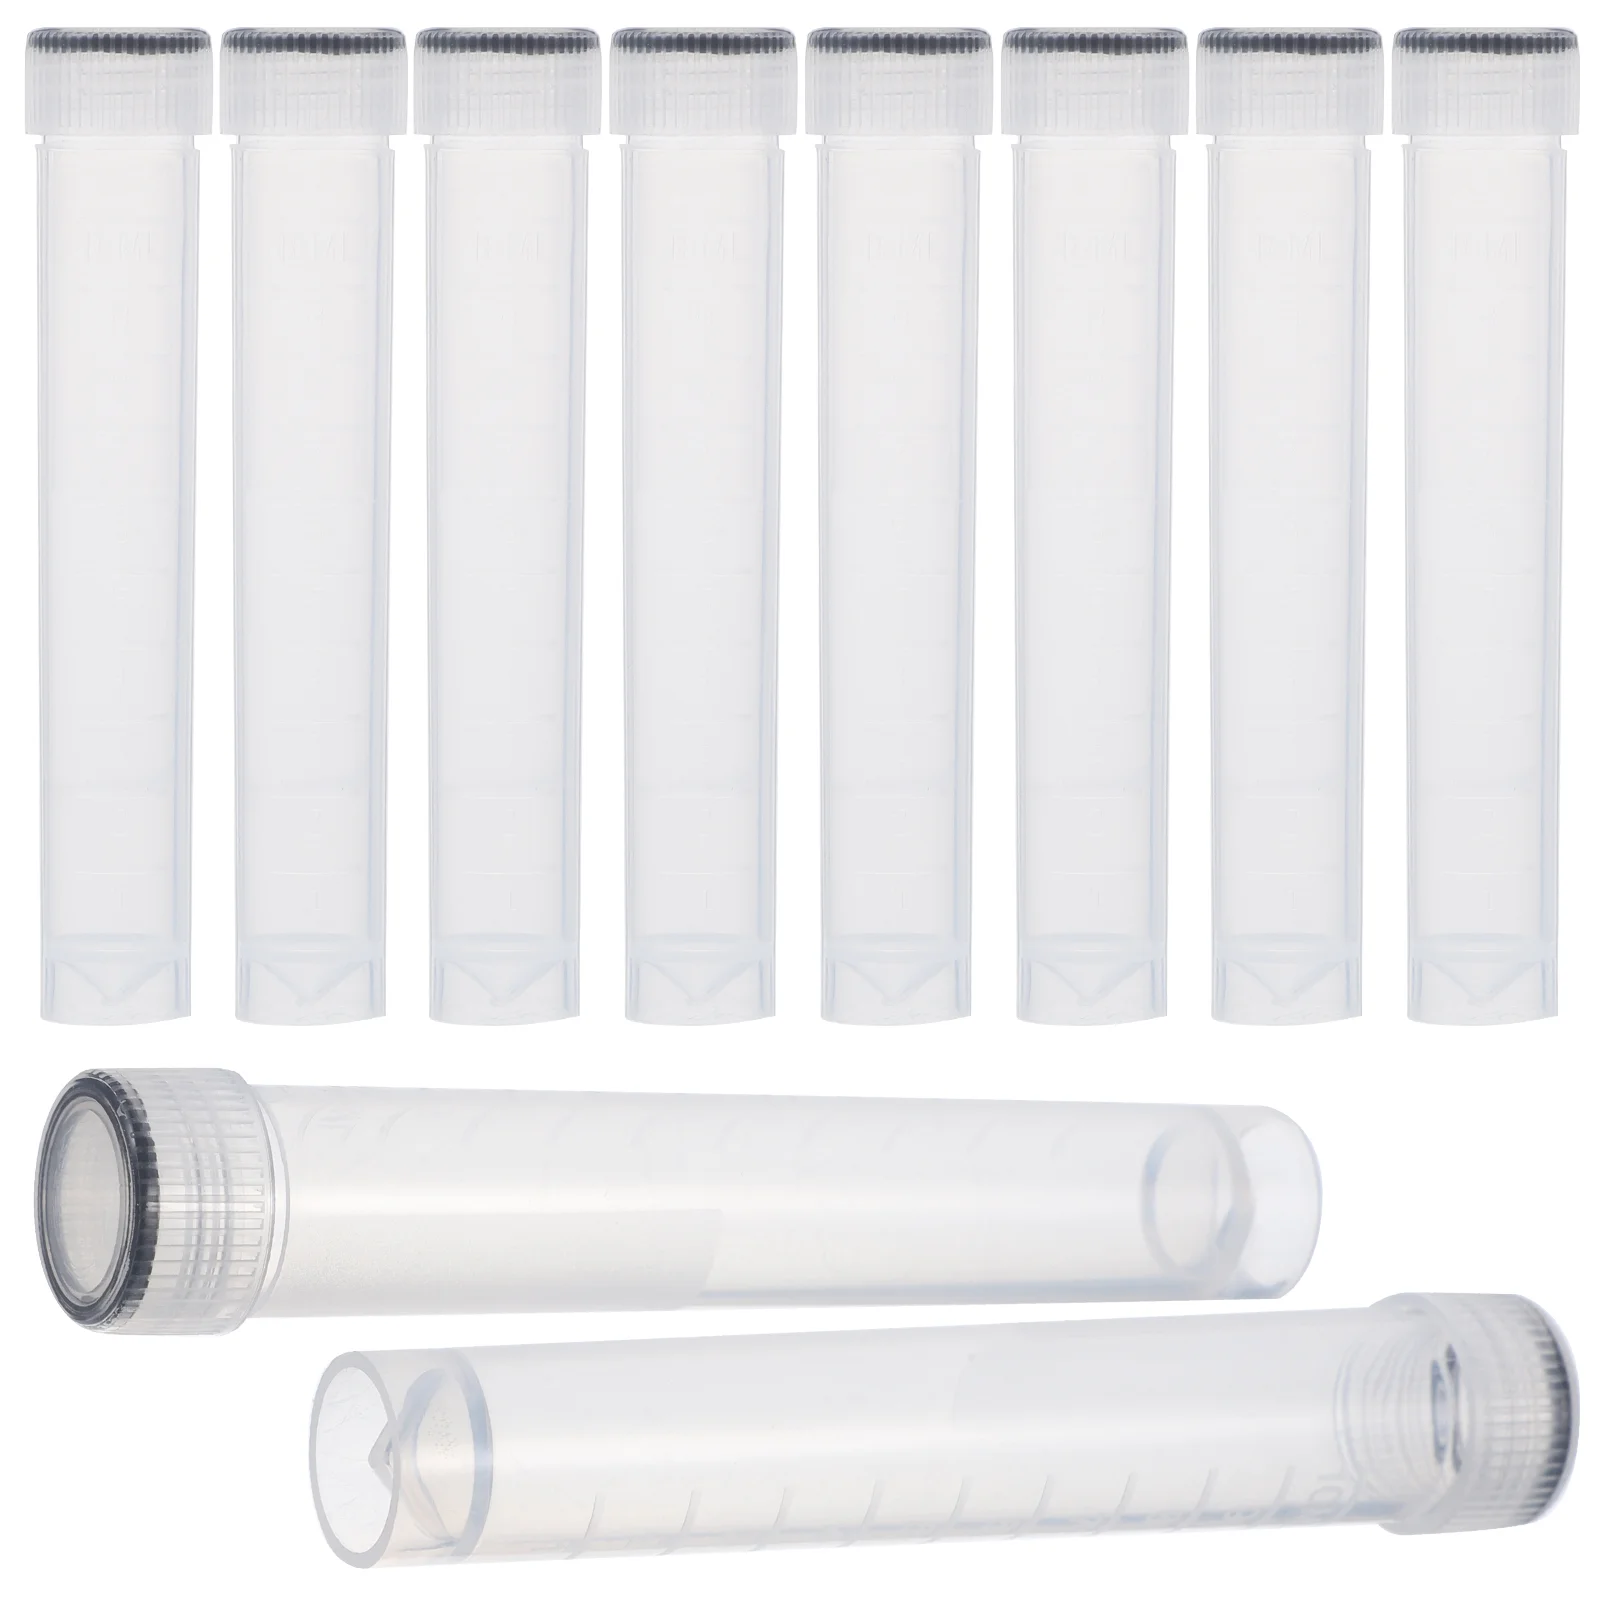 

10 Pcs Cryovial Sample Tubes Clear Plastic Containers 10ml Freezing Lids